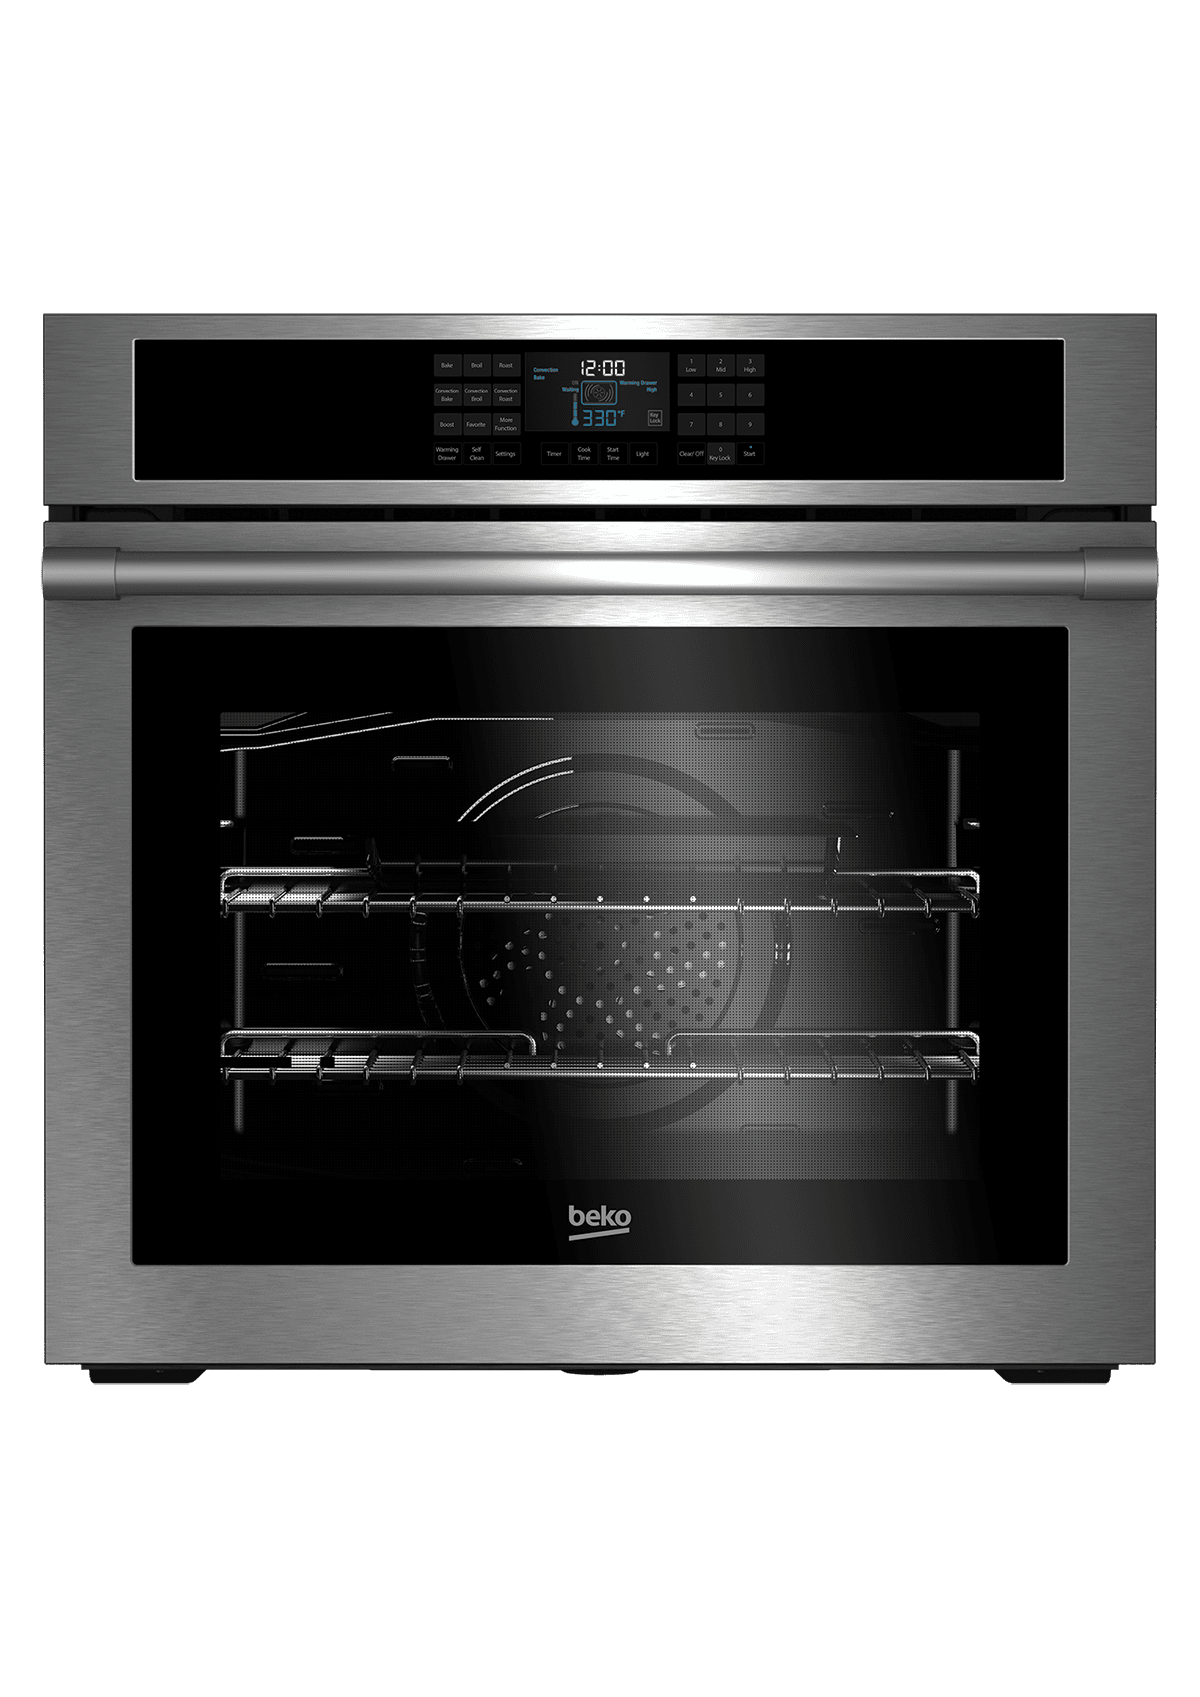 Beko WOS30100SS 30" Stainless Steel Single Wall Oven